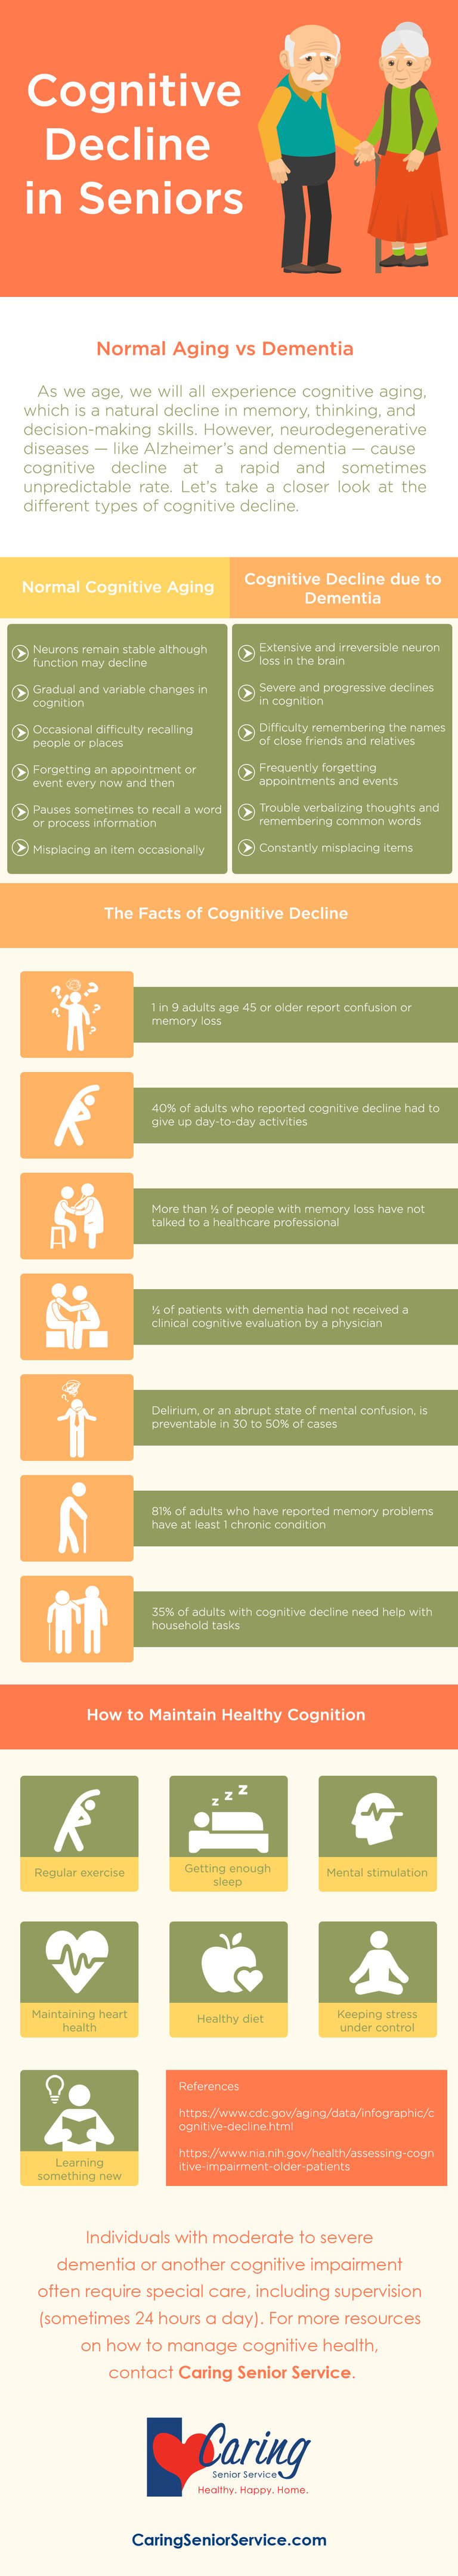 Cognitive Decline in Seniors Infographic-Branded